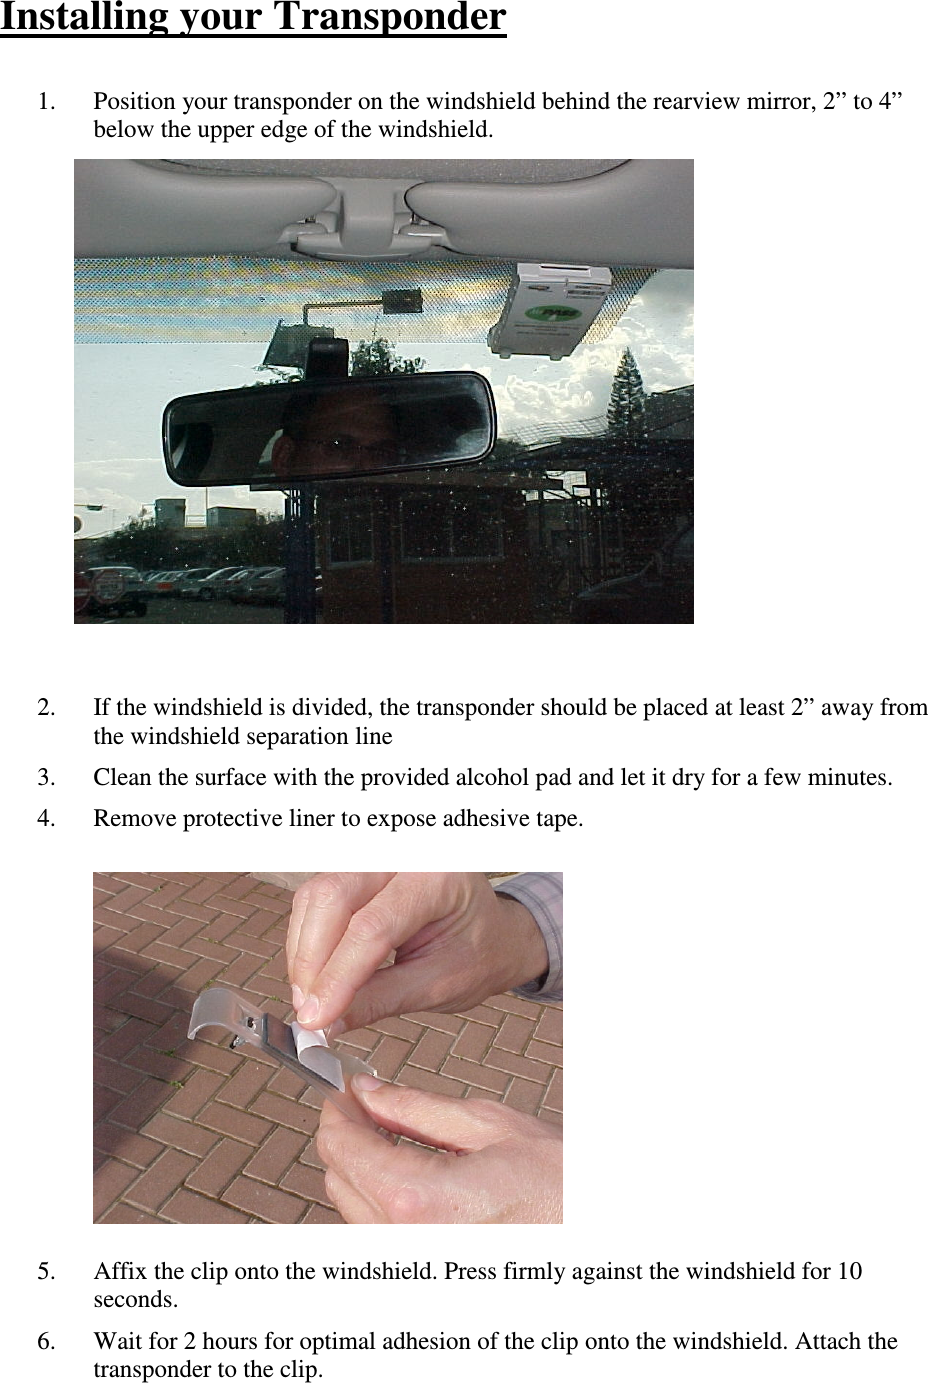 Installing your Transponder  1. Position your transponder on the windshield behind the rearview mirror, 2” to 4” below the upper edge of the windshield.              2. If the windshield is divided, the transponder should be placed at least 2” away from the windshield separation line 3. Clean the surface with the provided alcohol pad and let it dry for a few minutes. 4. Remove protective liner to expose adhesive tape.              5. Affix the clip onto the windshield. Press firmly against the windshield for 10 seconds. 6. Wait for 2 hours for optimal adhesion of the clip onto the windshield. Attach the transponder to the clip. 